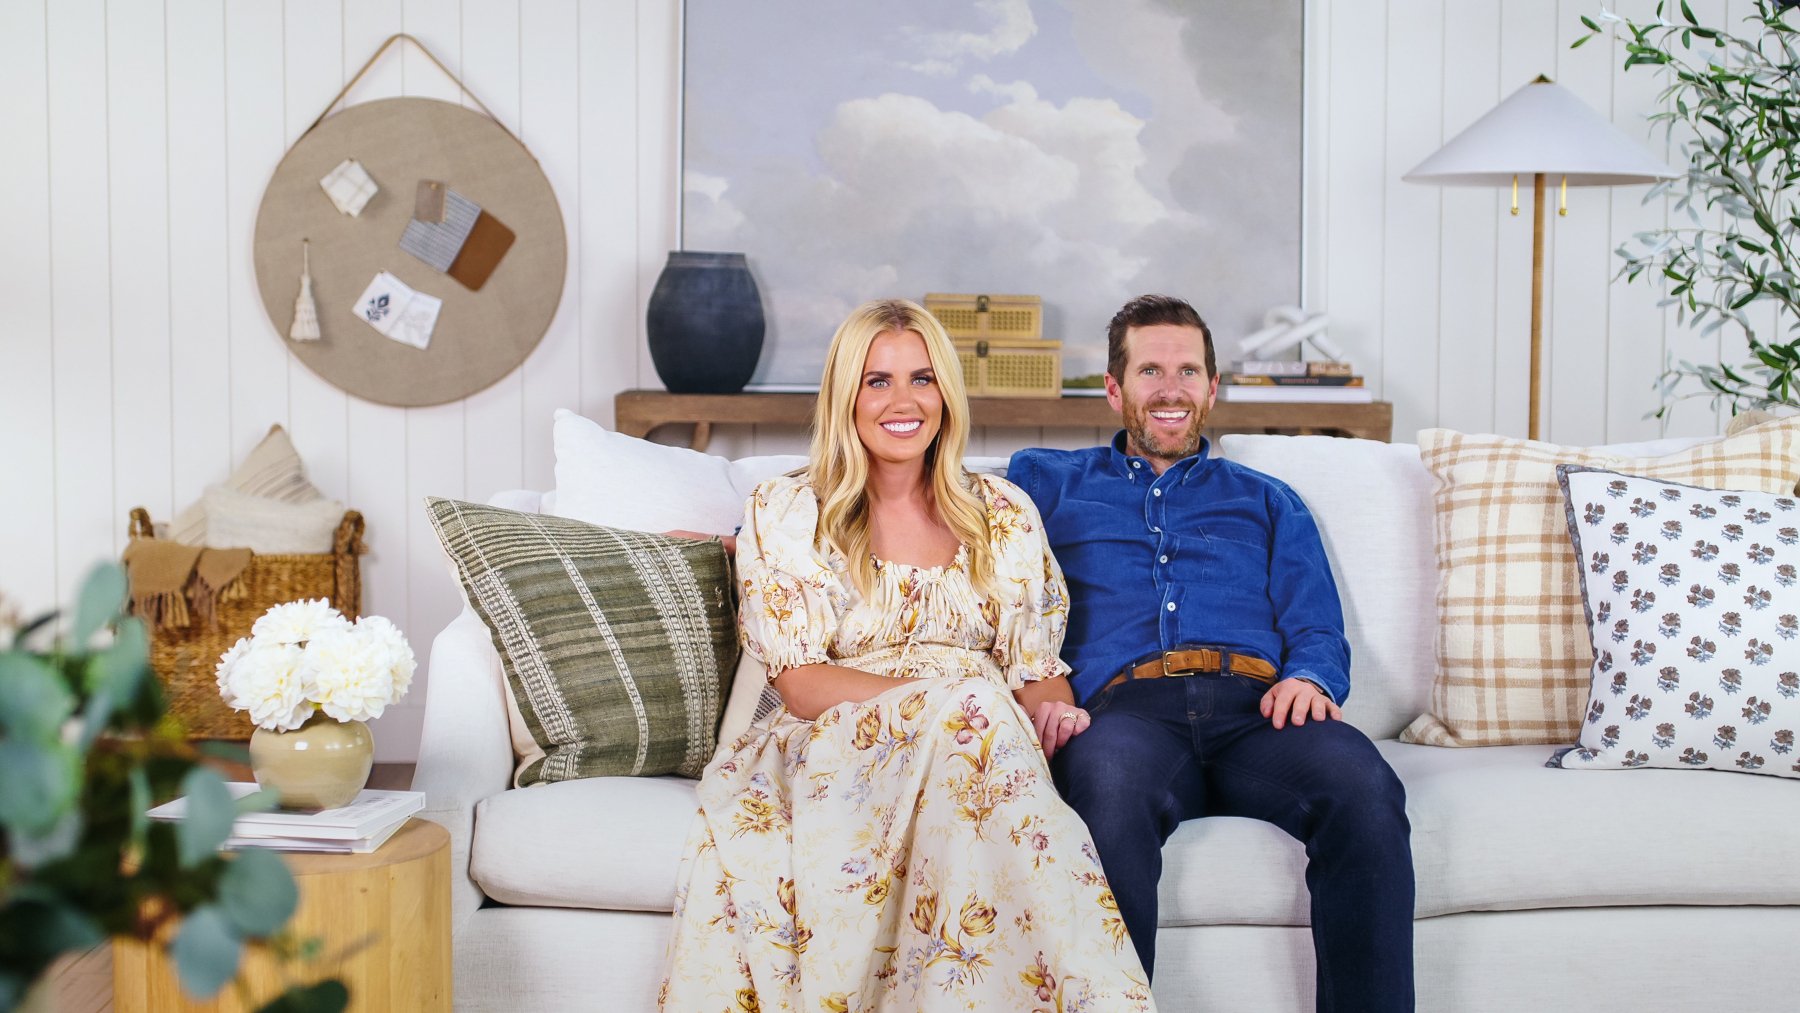 'Dream Home Makeover' hosts Shea and Syd McGee sitting on a couch for our article about their net worth. She's wearing a white, floral dress and he's wearing a blue shirt.